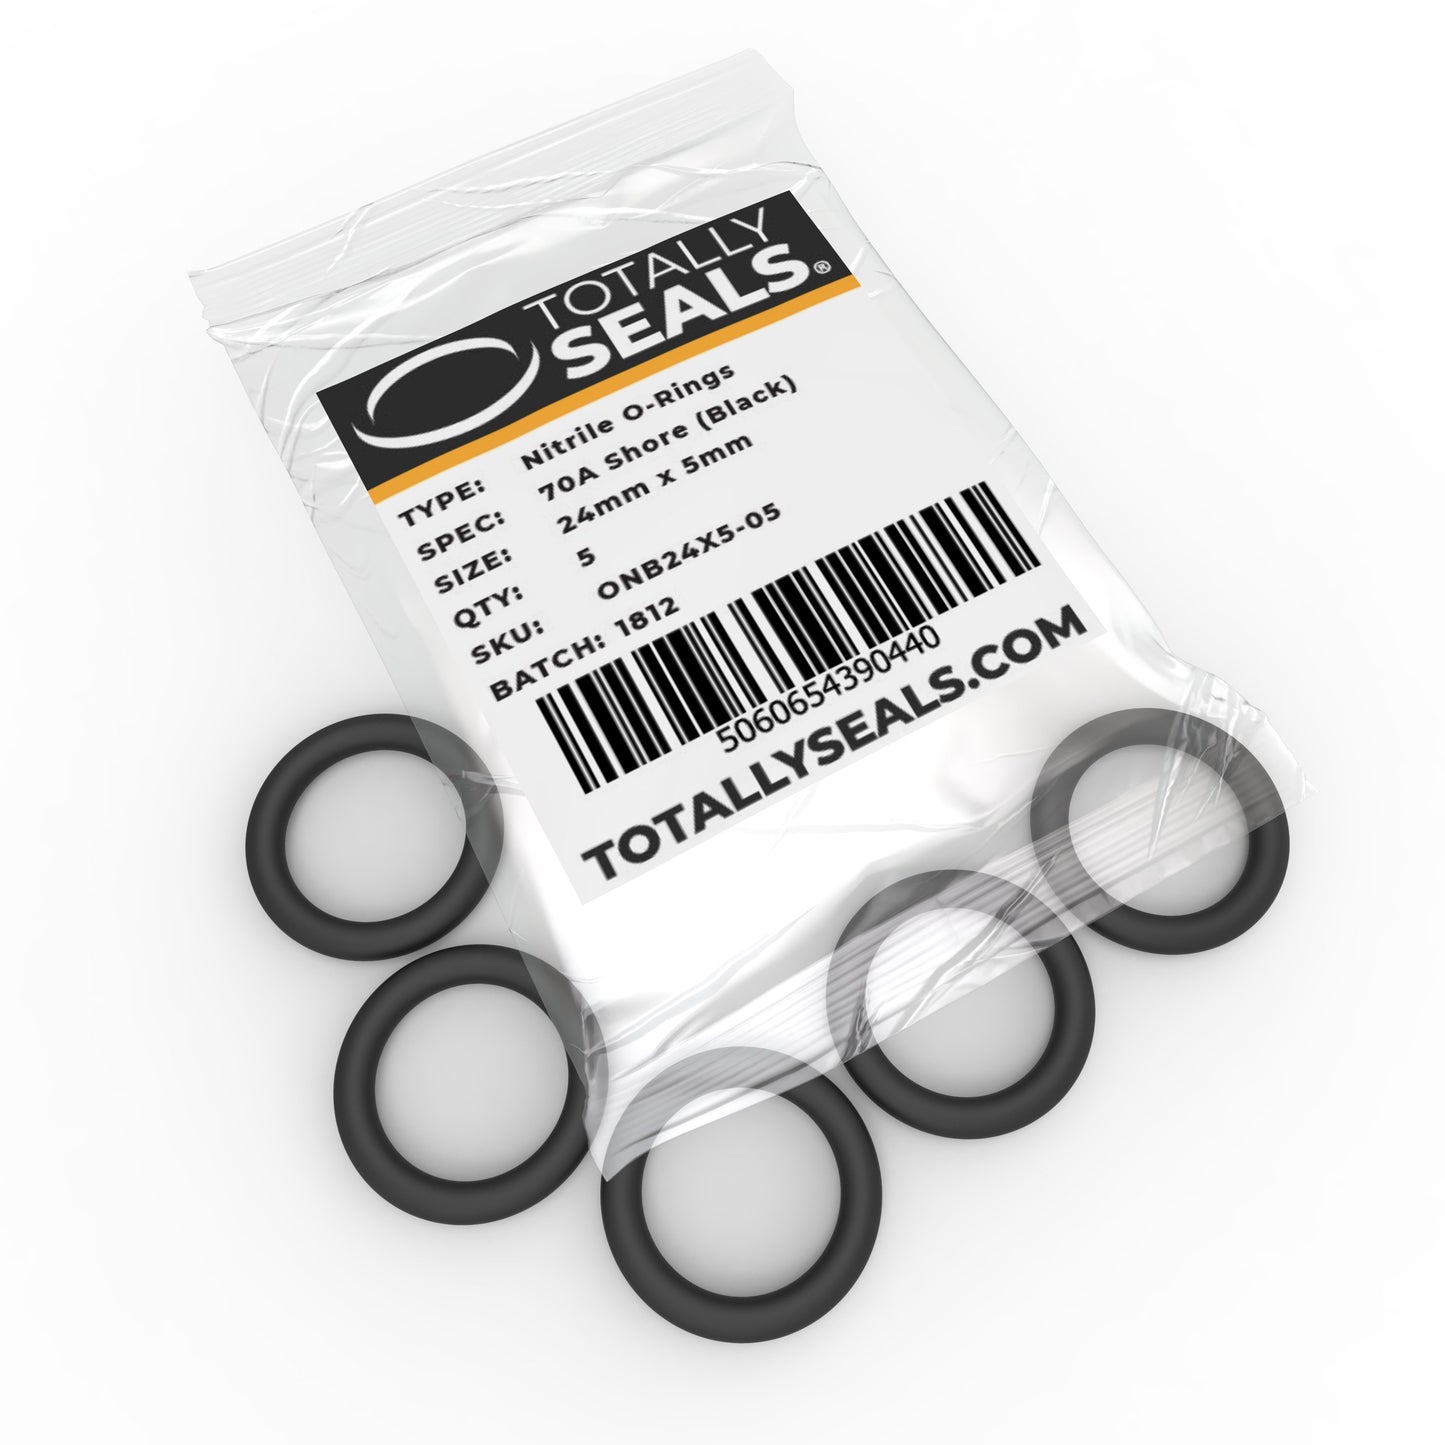 24mm x 5mm (34mm OD) Nitrile O-Rings - Totally Seals®